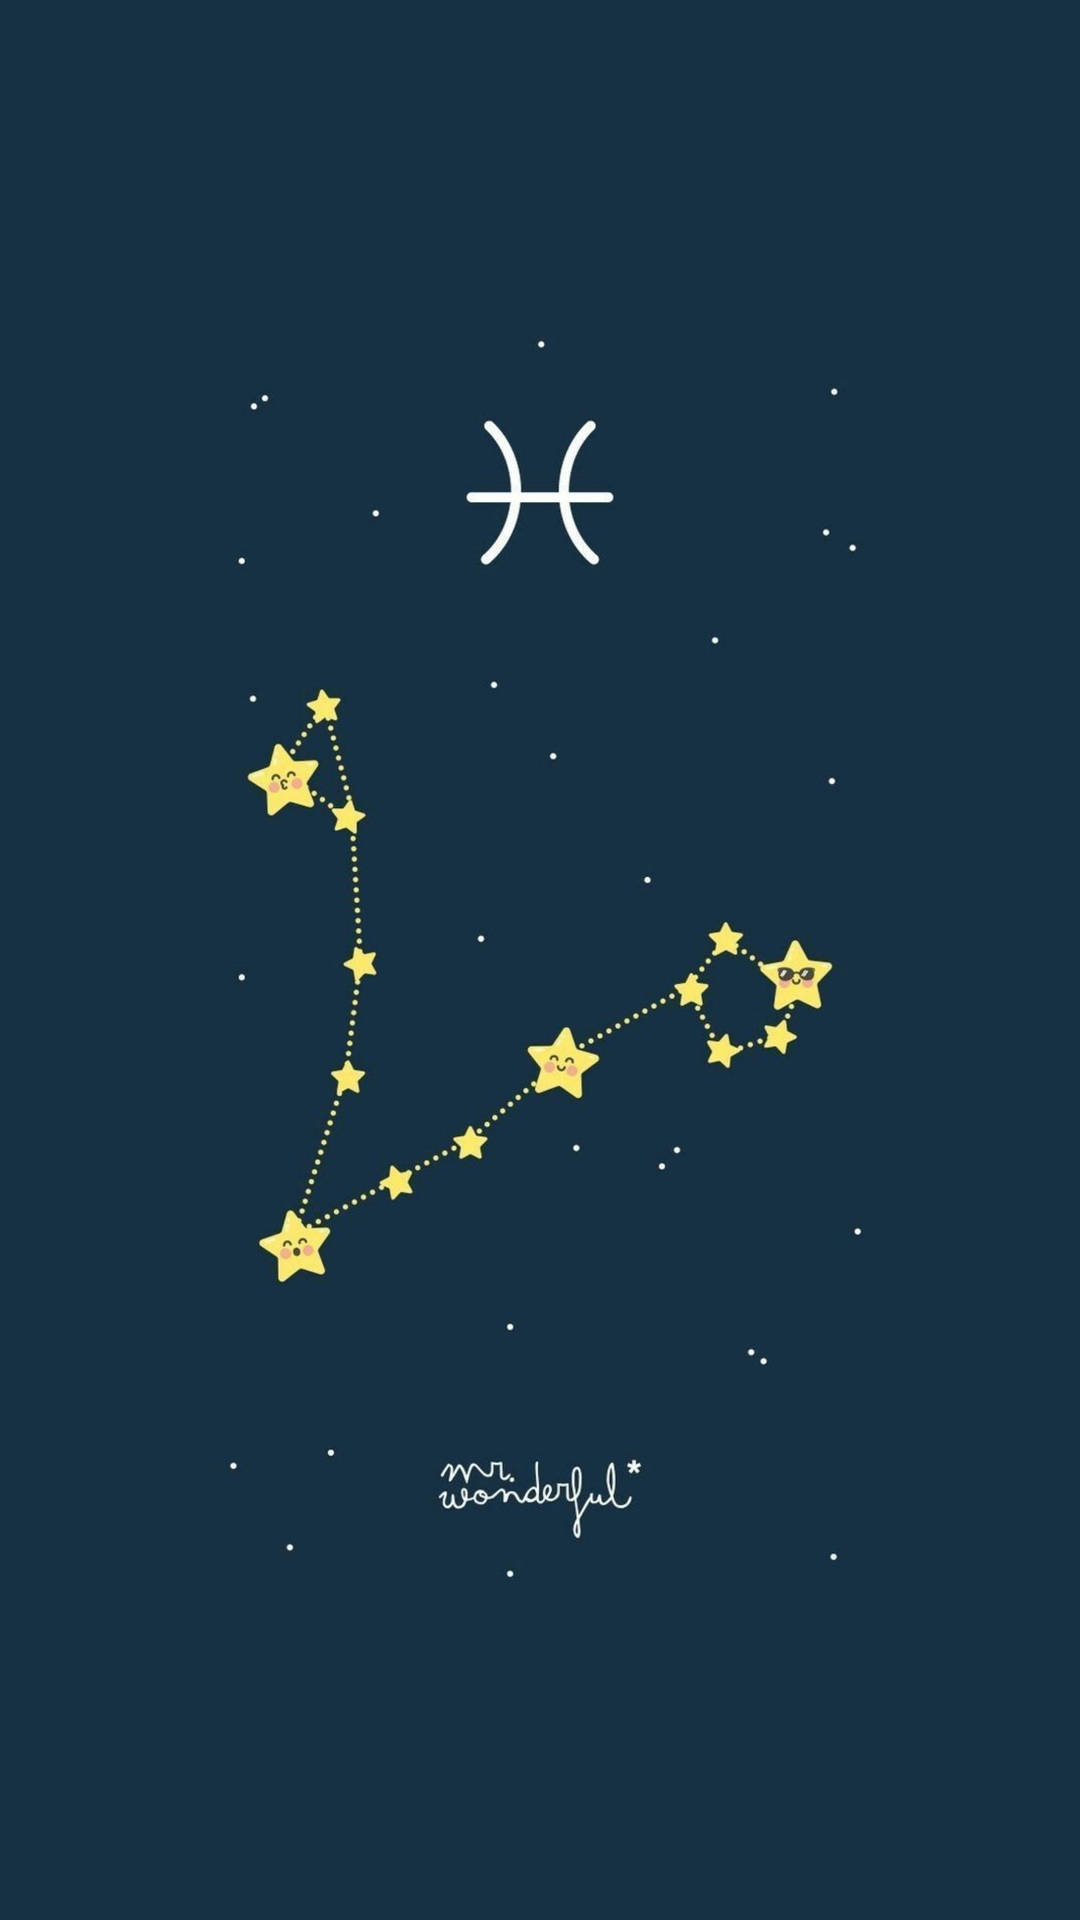 Caption: Vibrant Cartoon Illustration Of Pisces Constellation In The Starry Night Sky Background